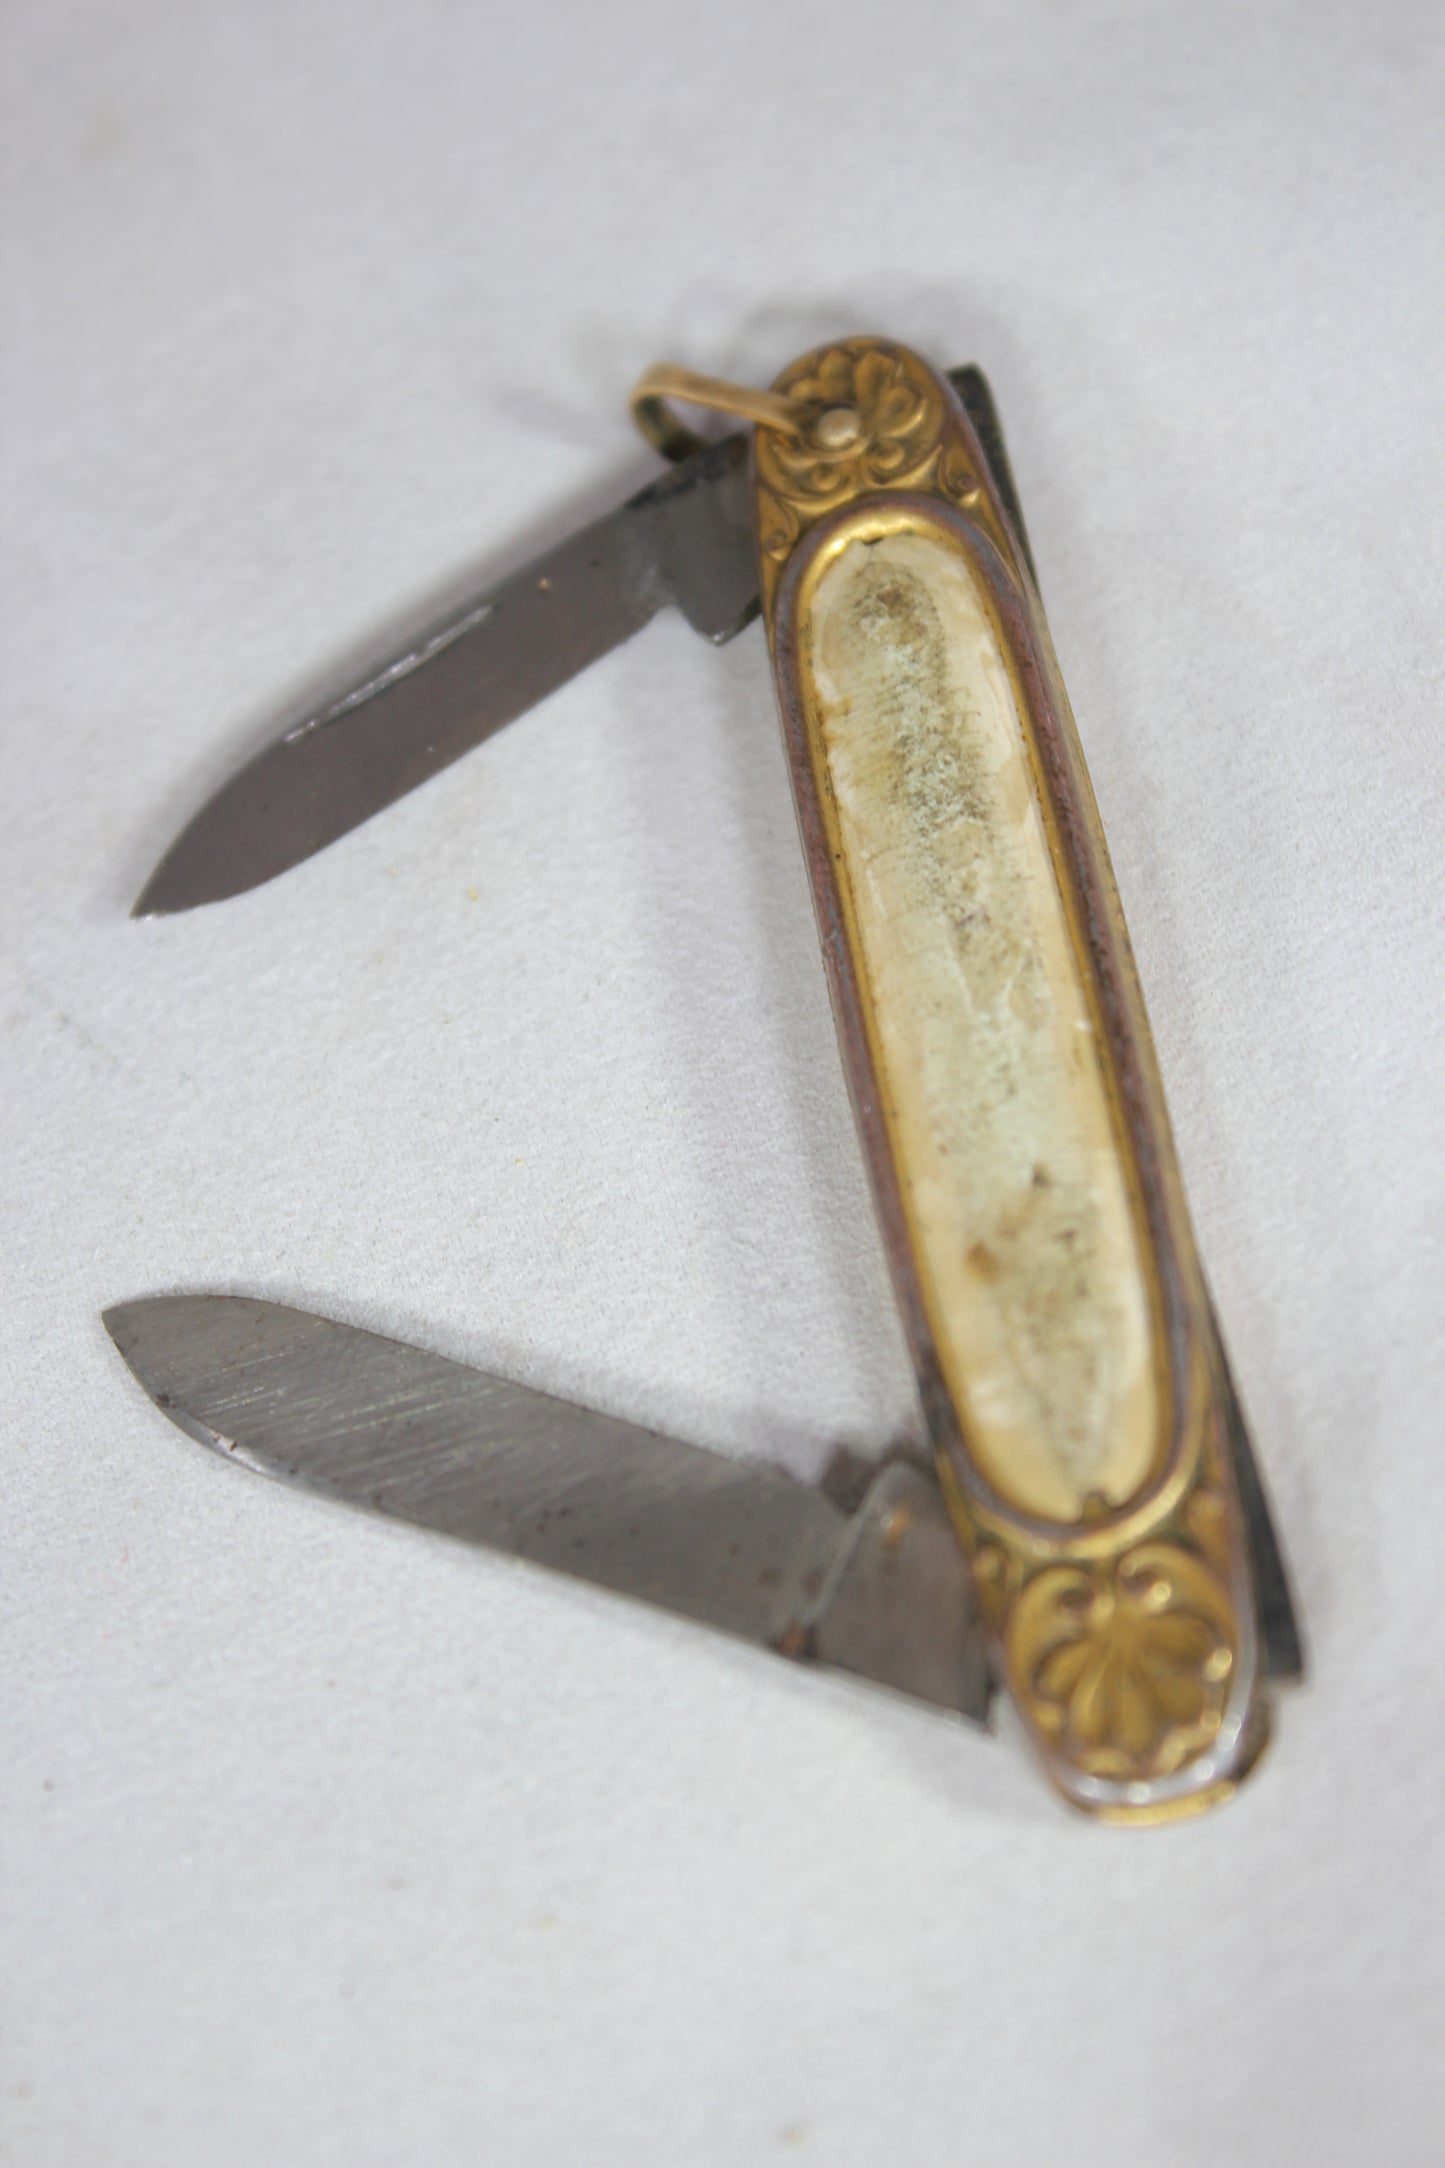 Antique Pocket Knife with an Image of a Nude Woman, 1920s